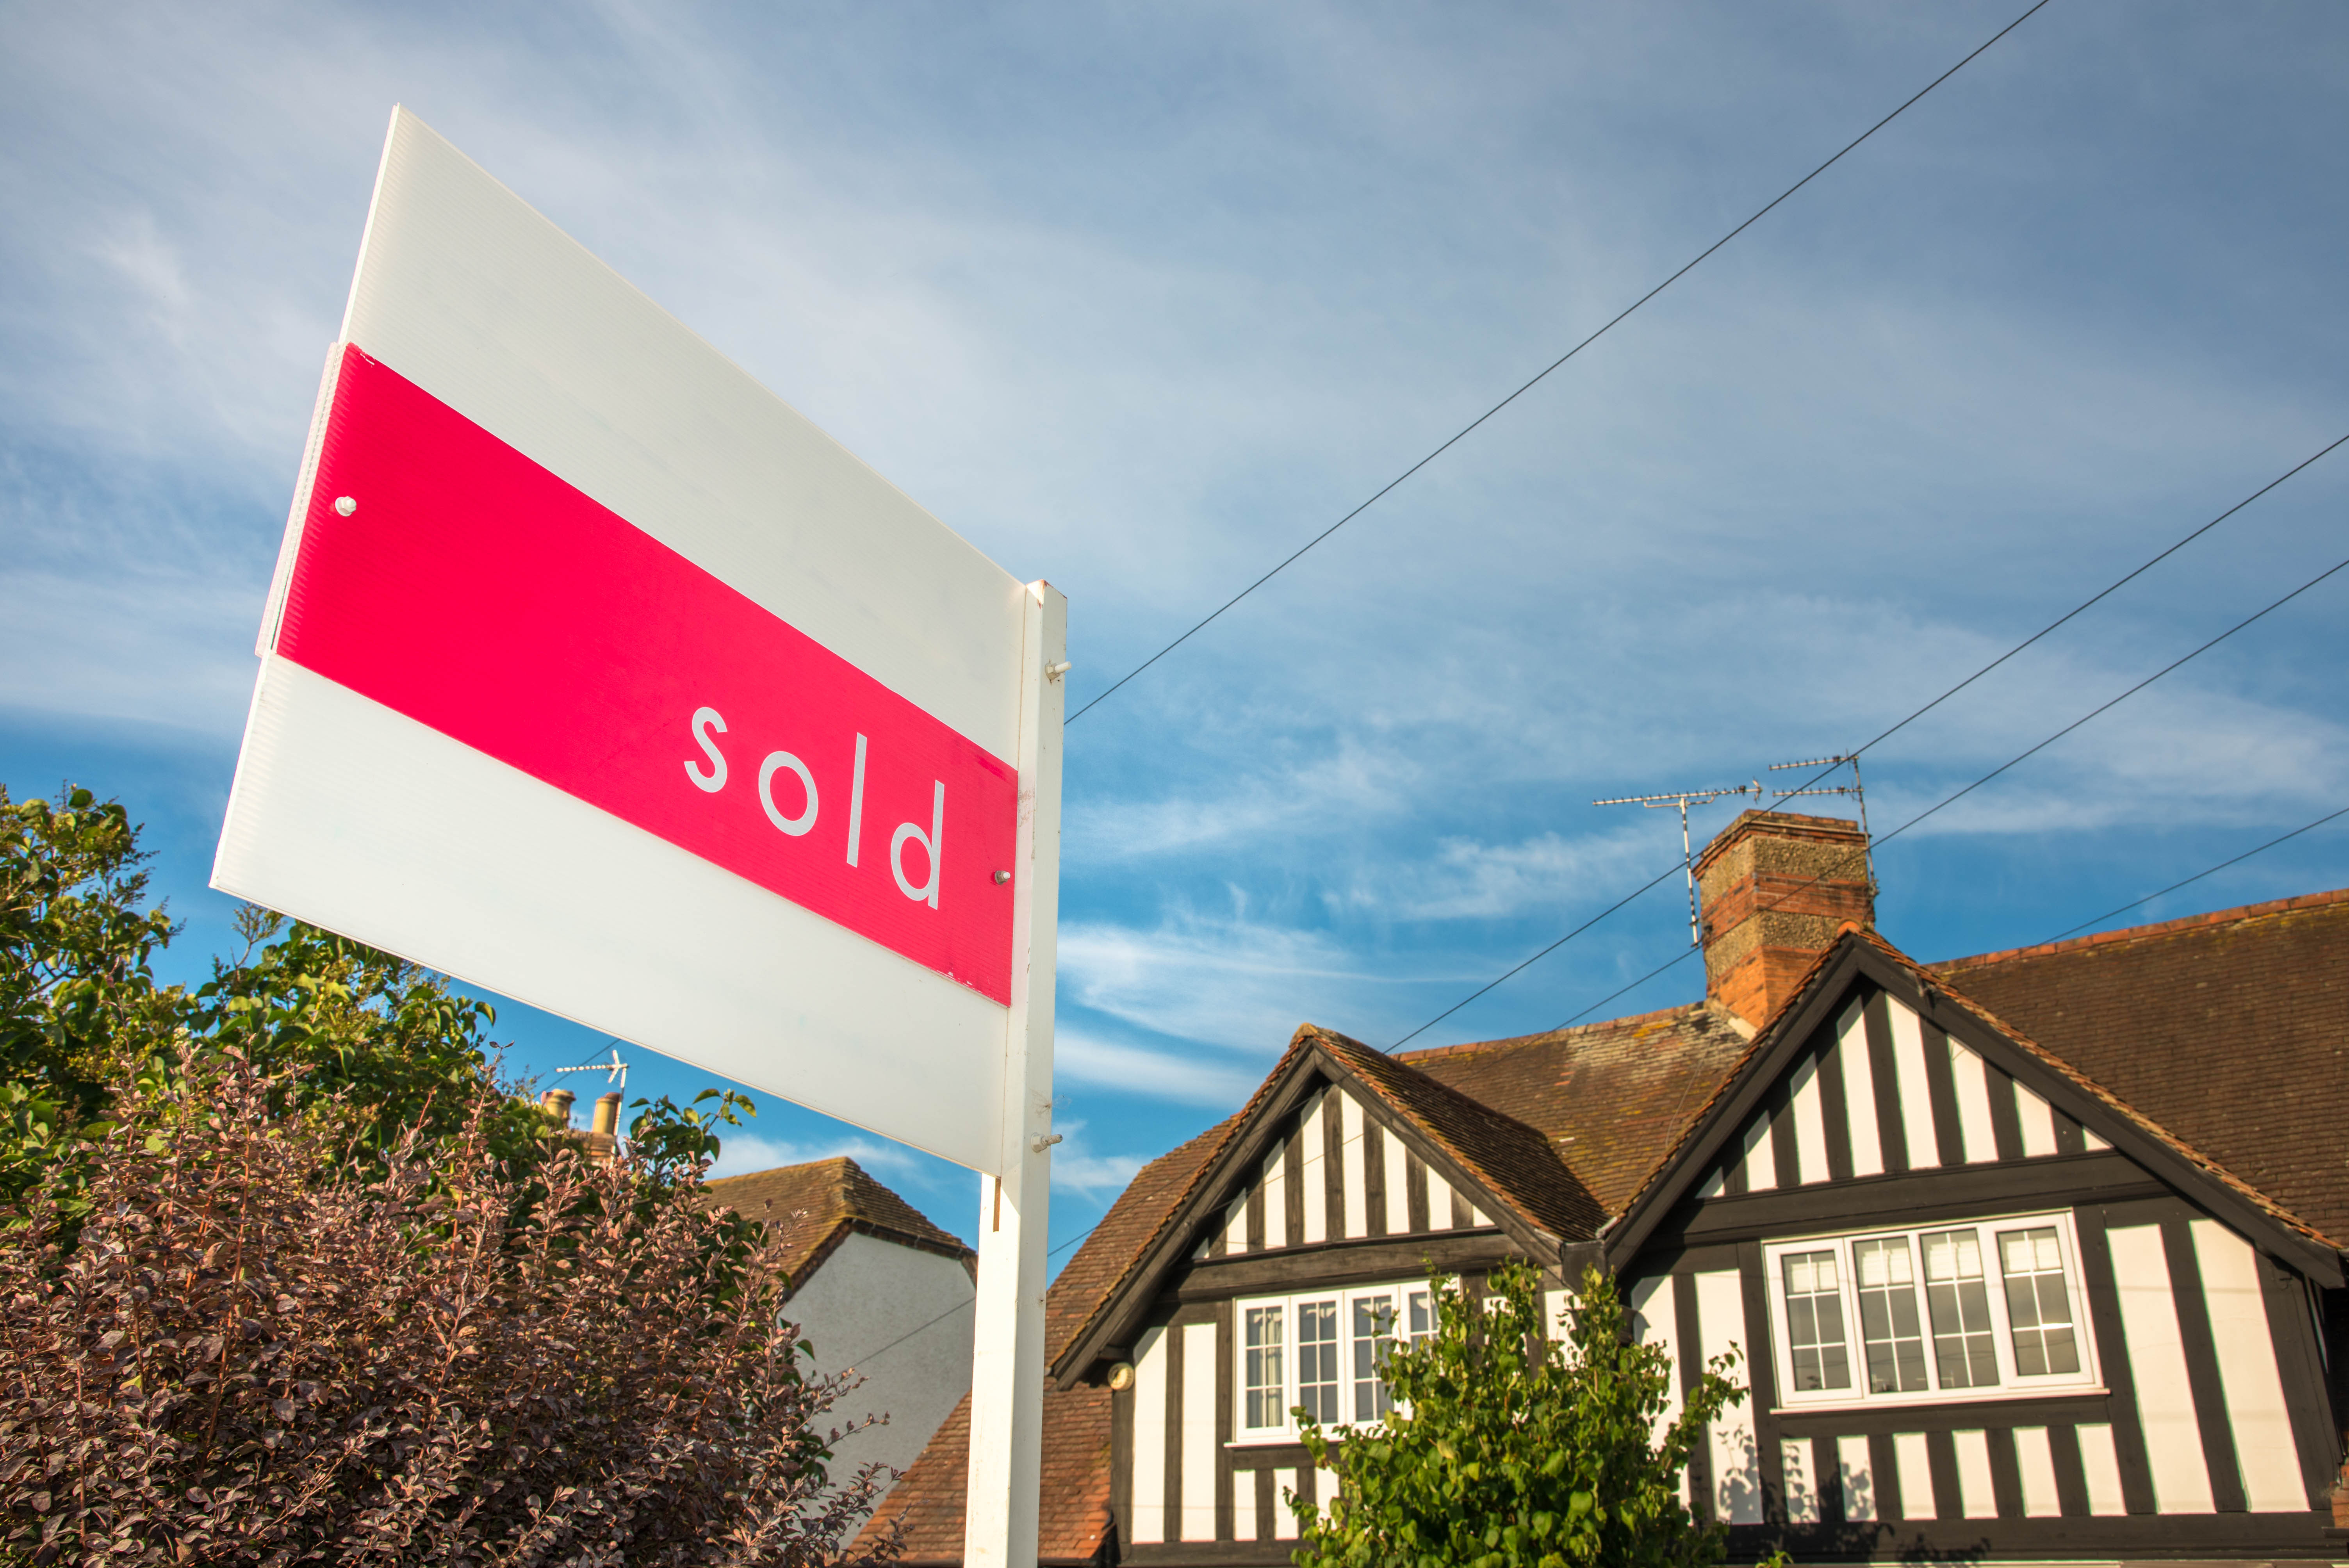 Property market to re-open as viewing and moving properties allowed once more